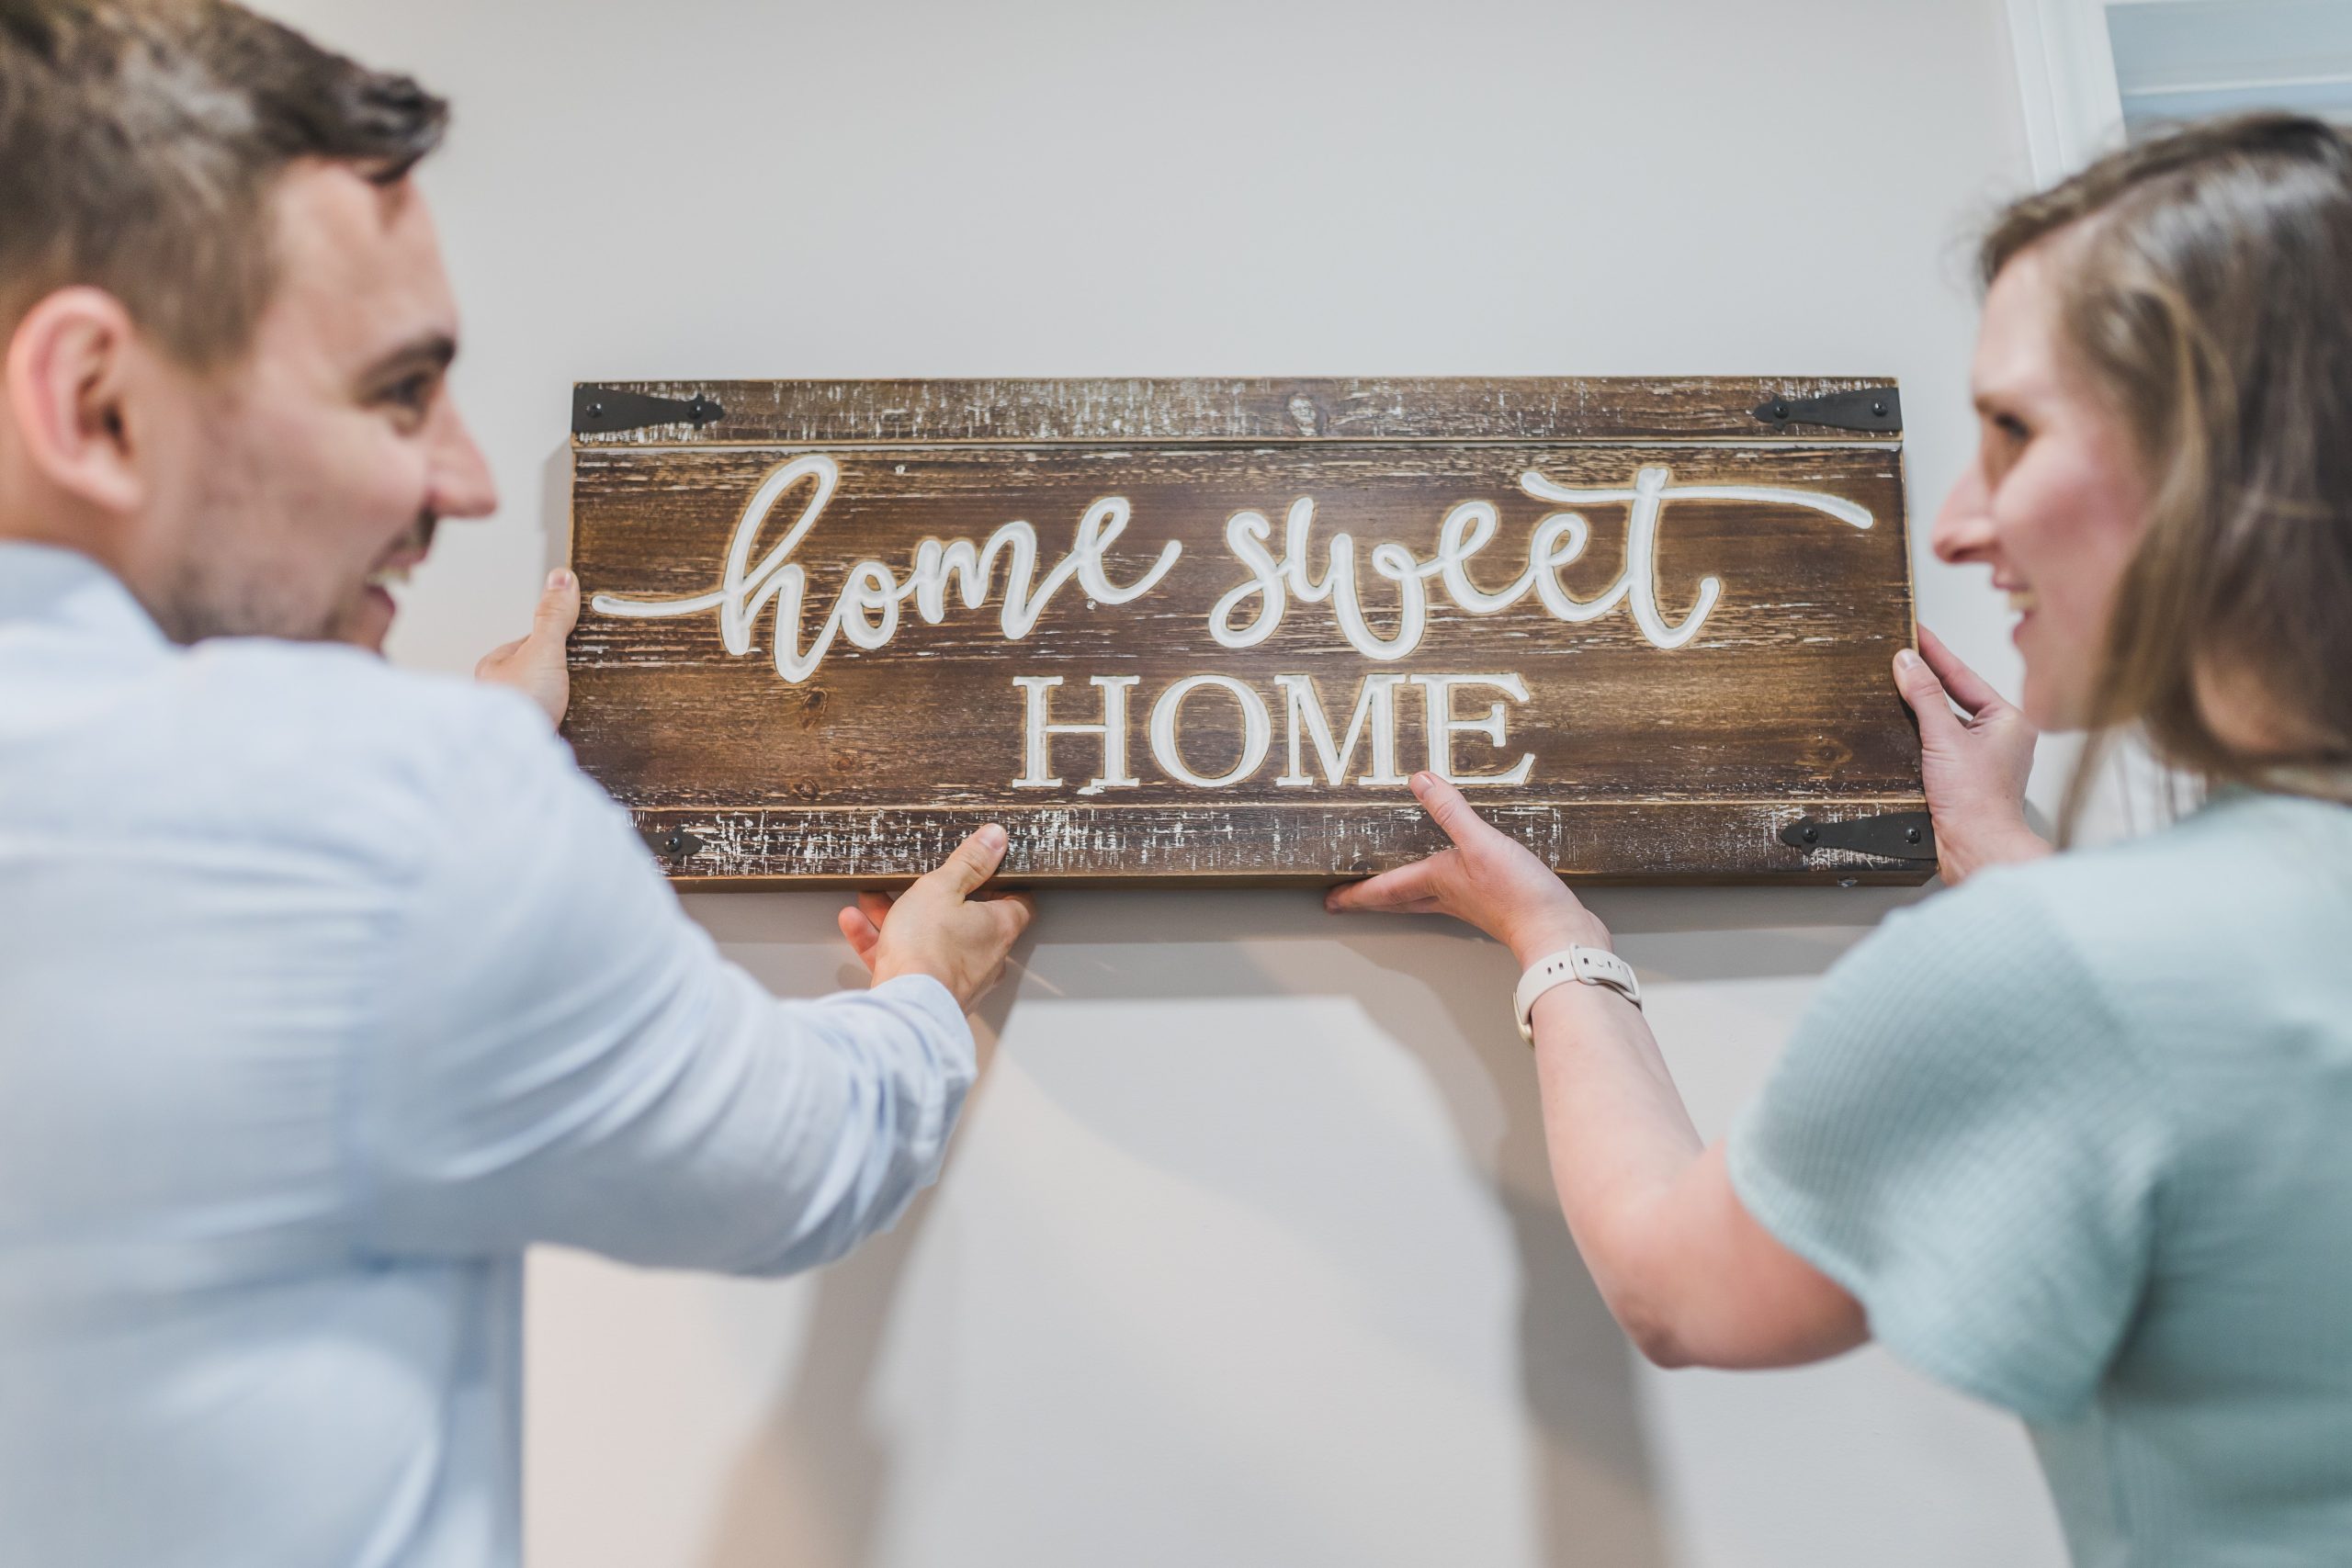 A man and a woman are hanging a wooden sign on a wall that reads “Home Sweet Home.” They are smiling and appear to be in a happy, domestic setting.